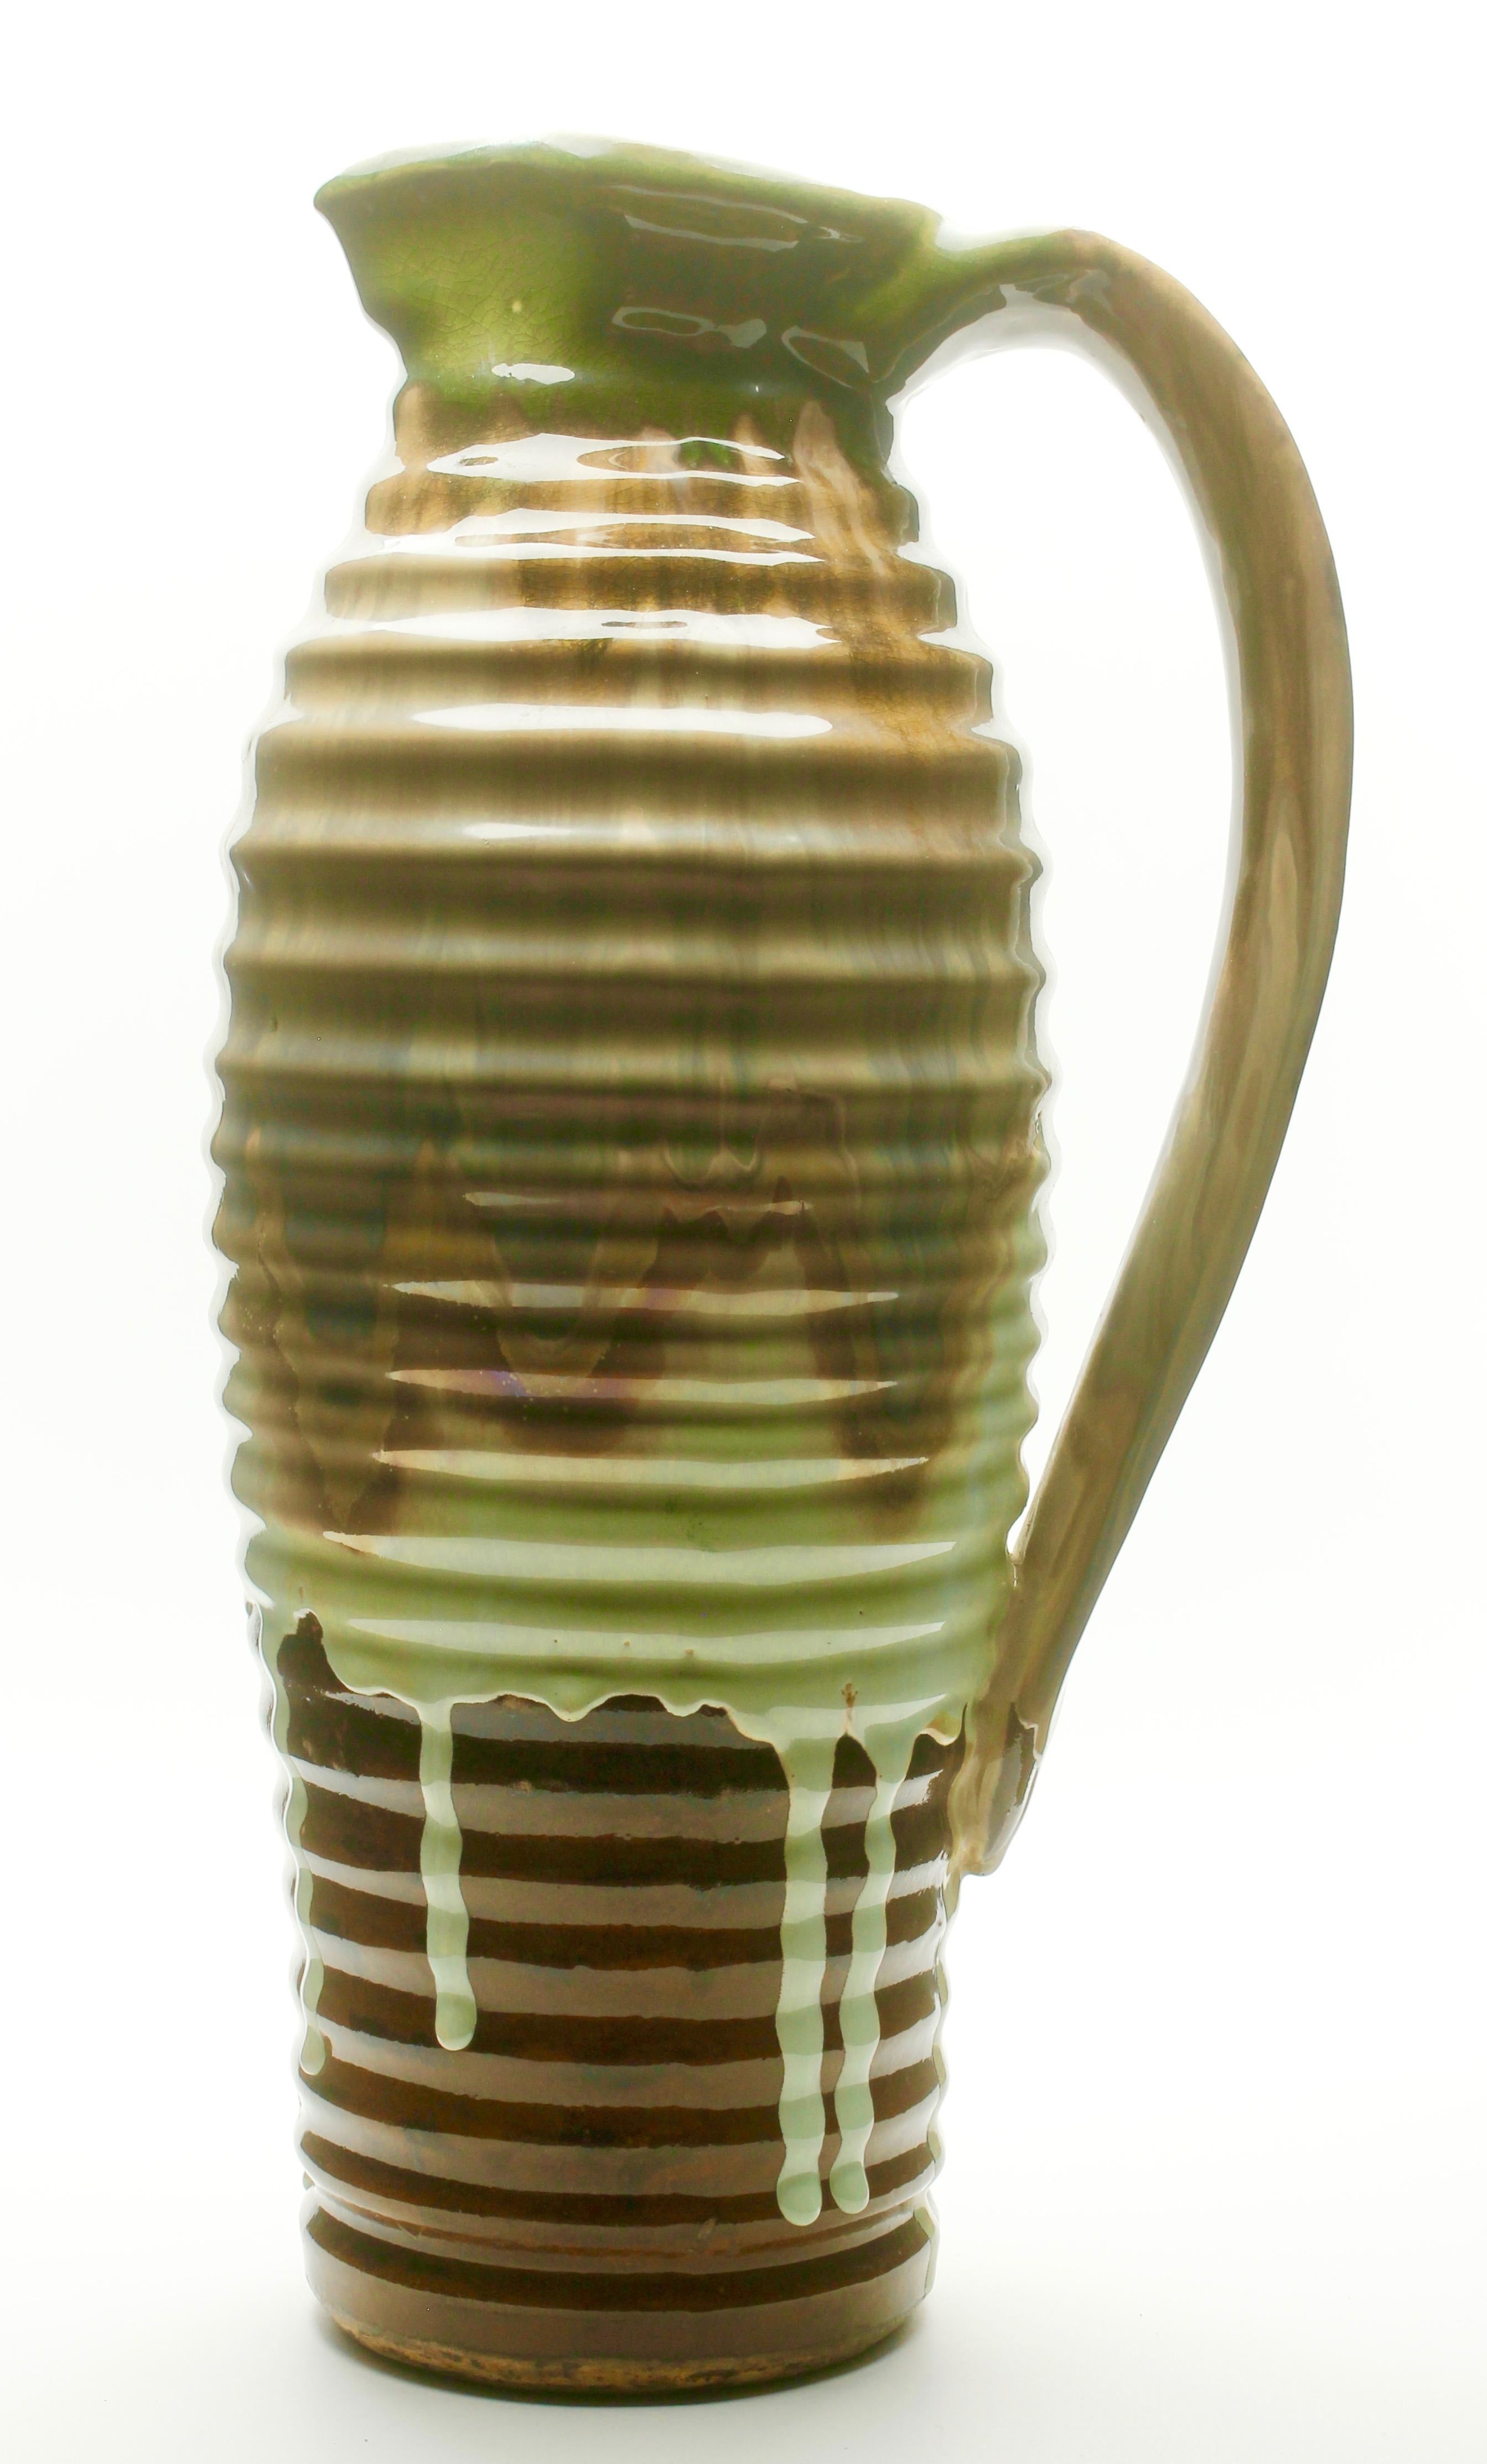 French ceramic vase, pitcher vase, France, circa 1930
handcrafted and glazed earthenware with horizontal ribs.
Beautiful glaze in brown and green tints
Perfect